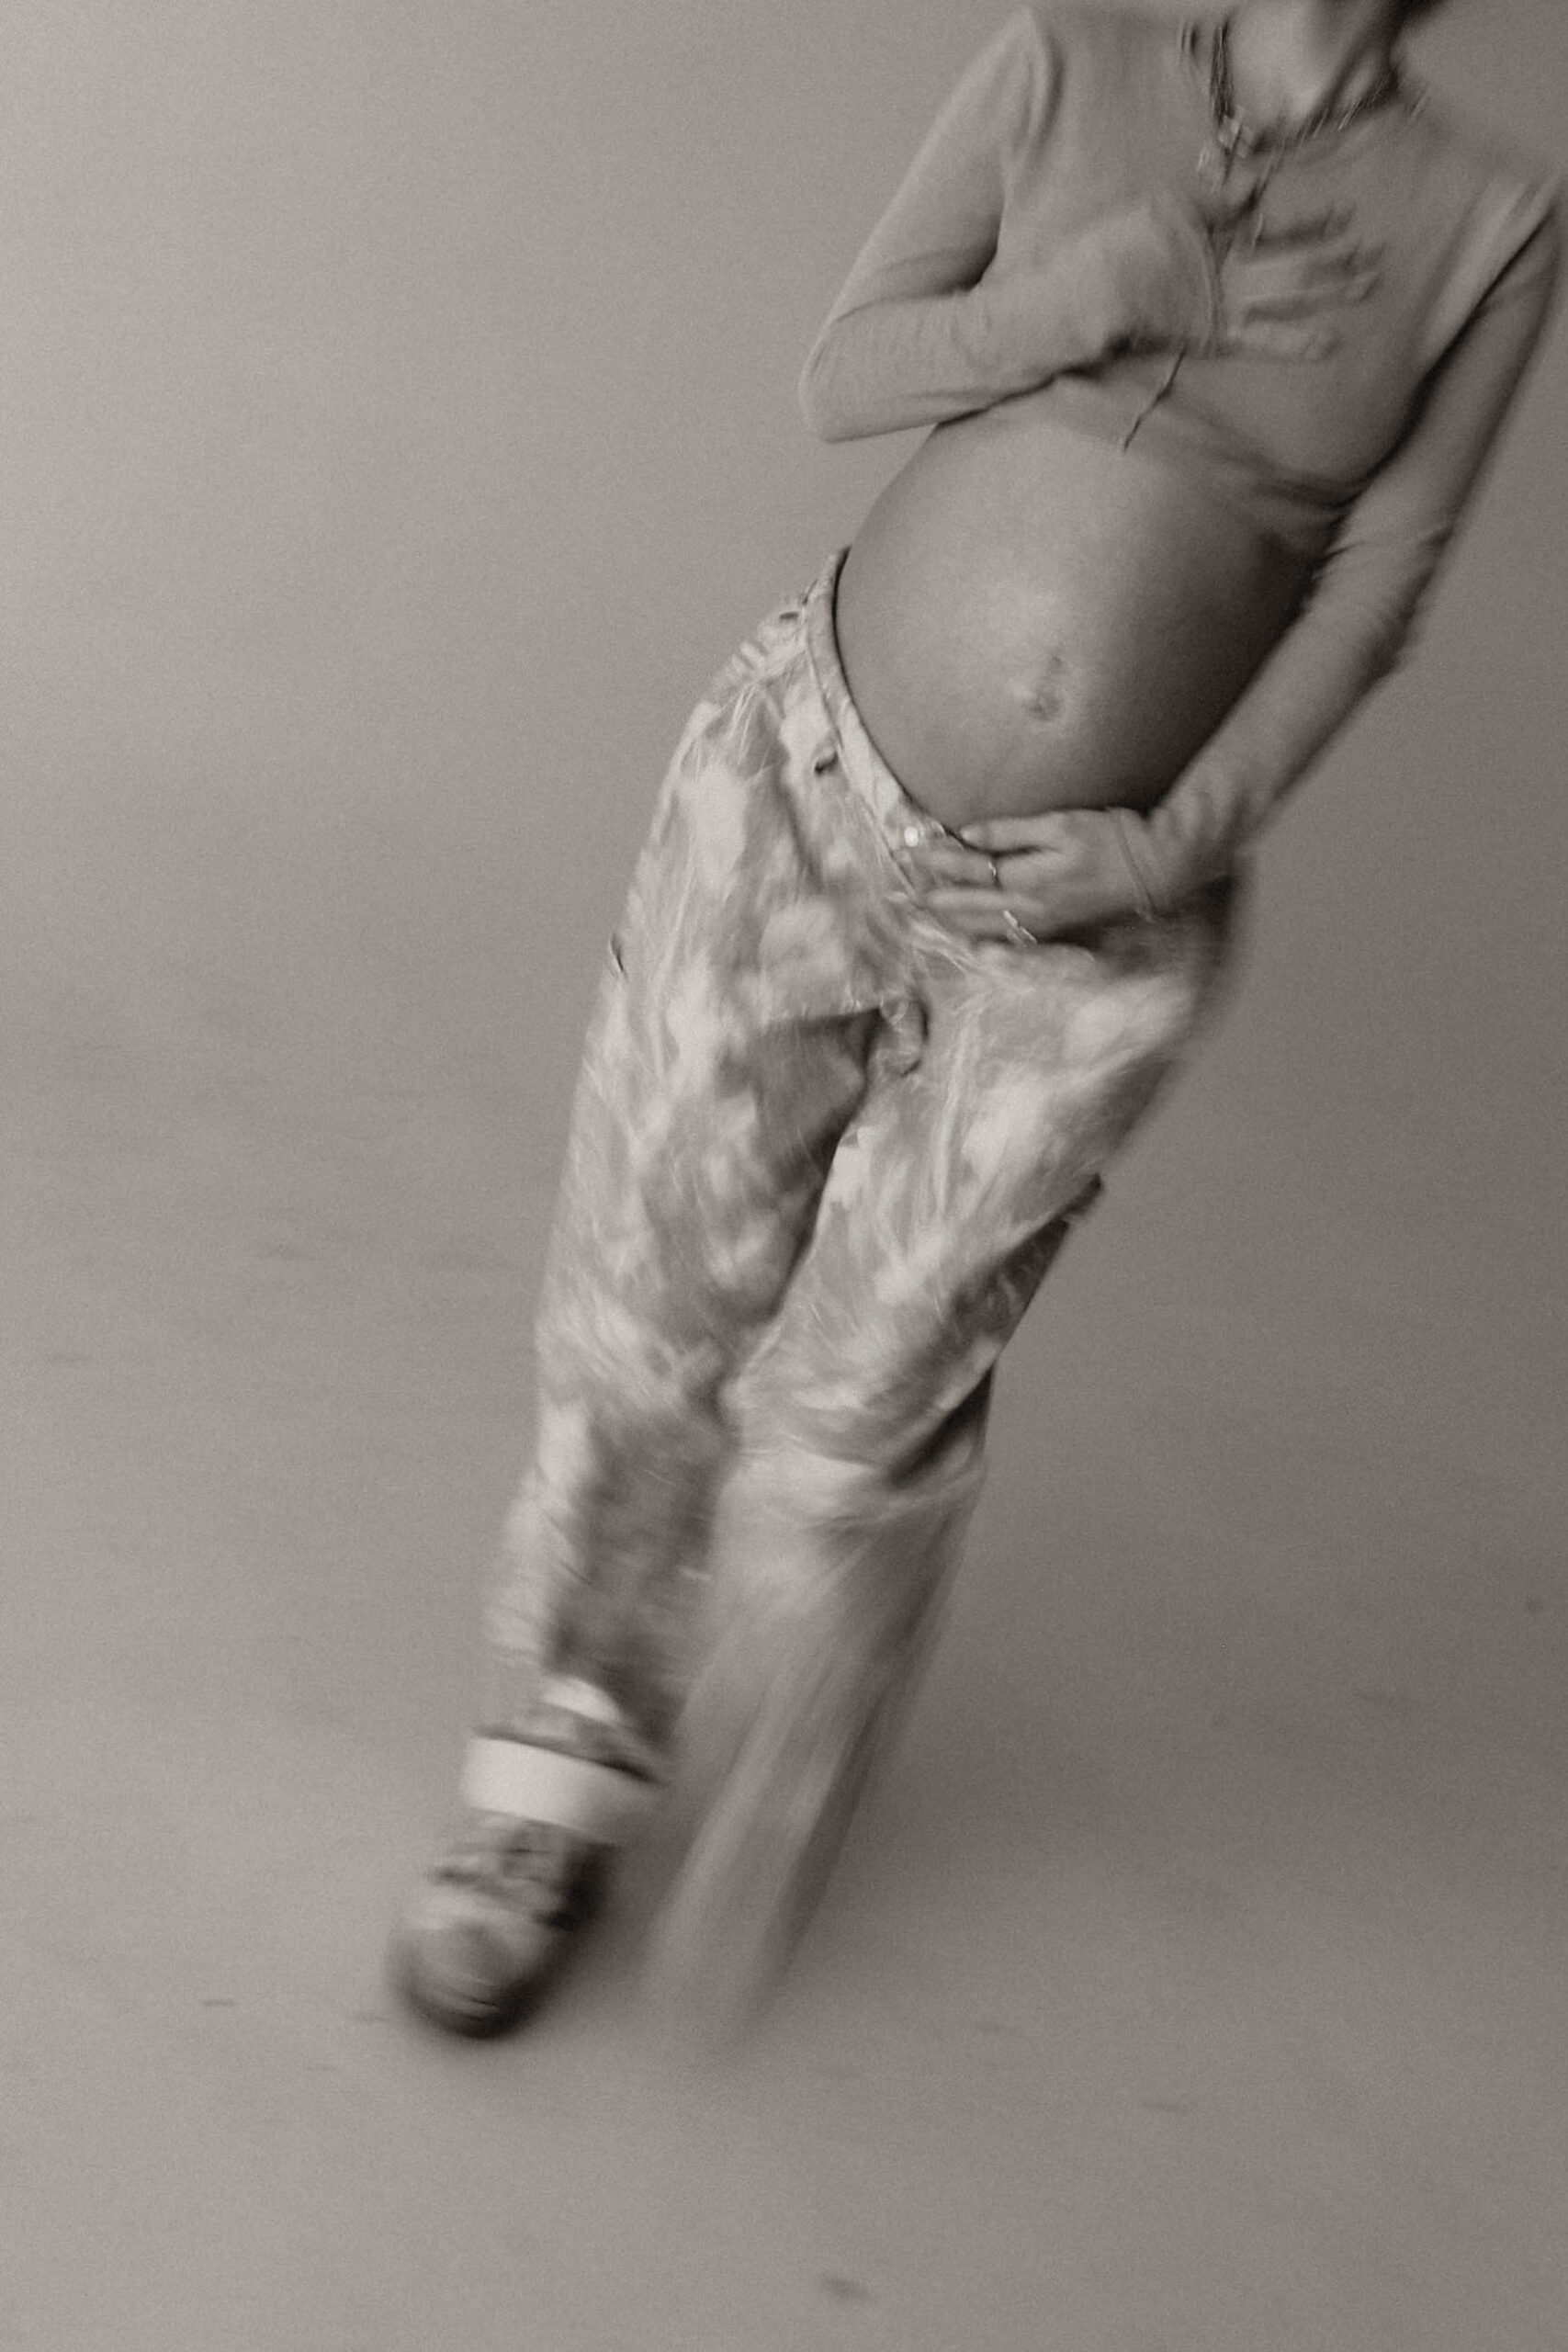 blurry photo of a woman's belly during denver maternity photoshoot